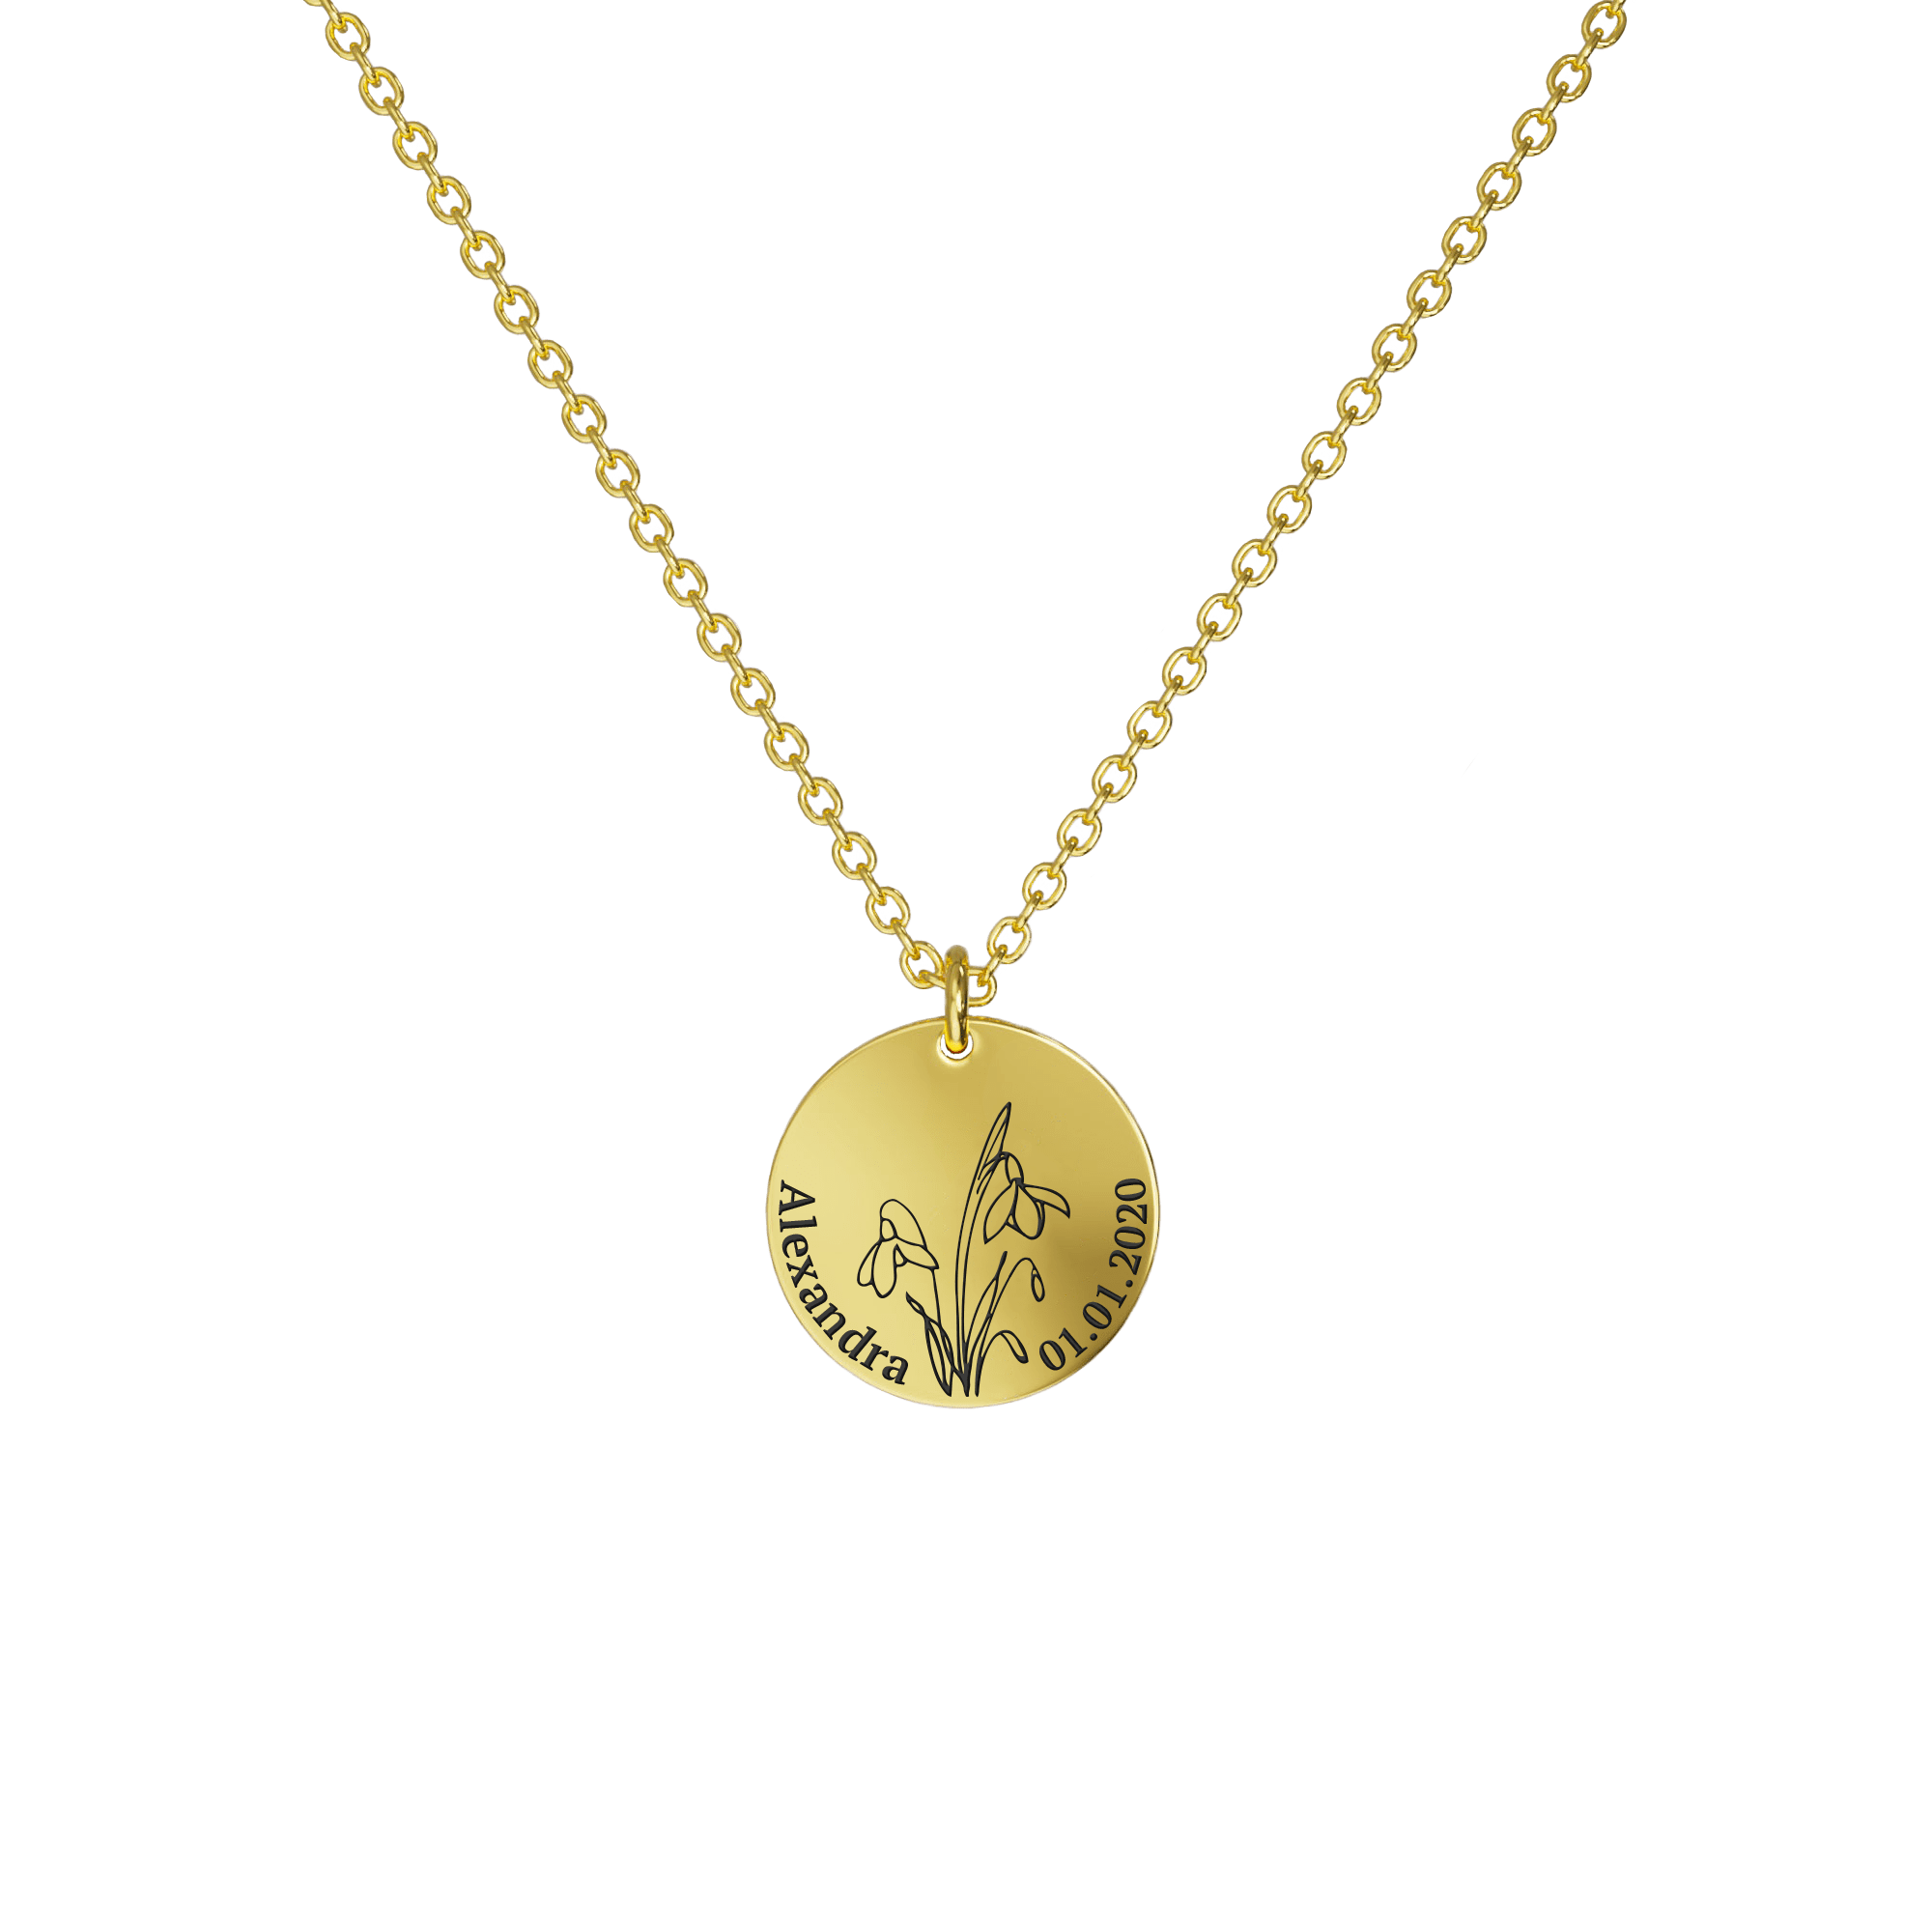 Mother's Day Gift Birth Flower Pendant Necklace 18K Gold Plated / Style 1 - Bold / January Necklace MelodyNecklace